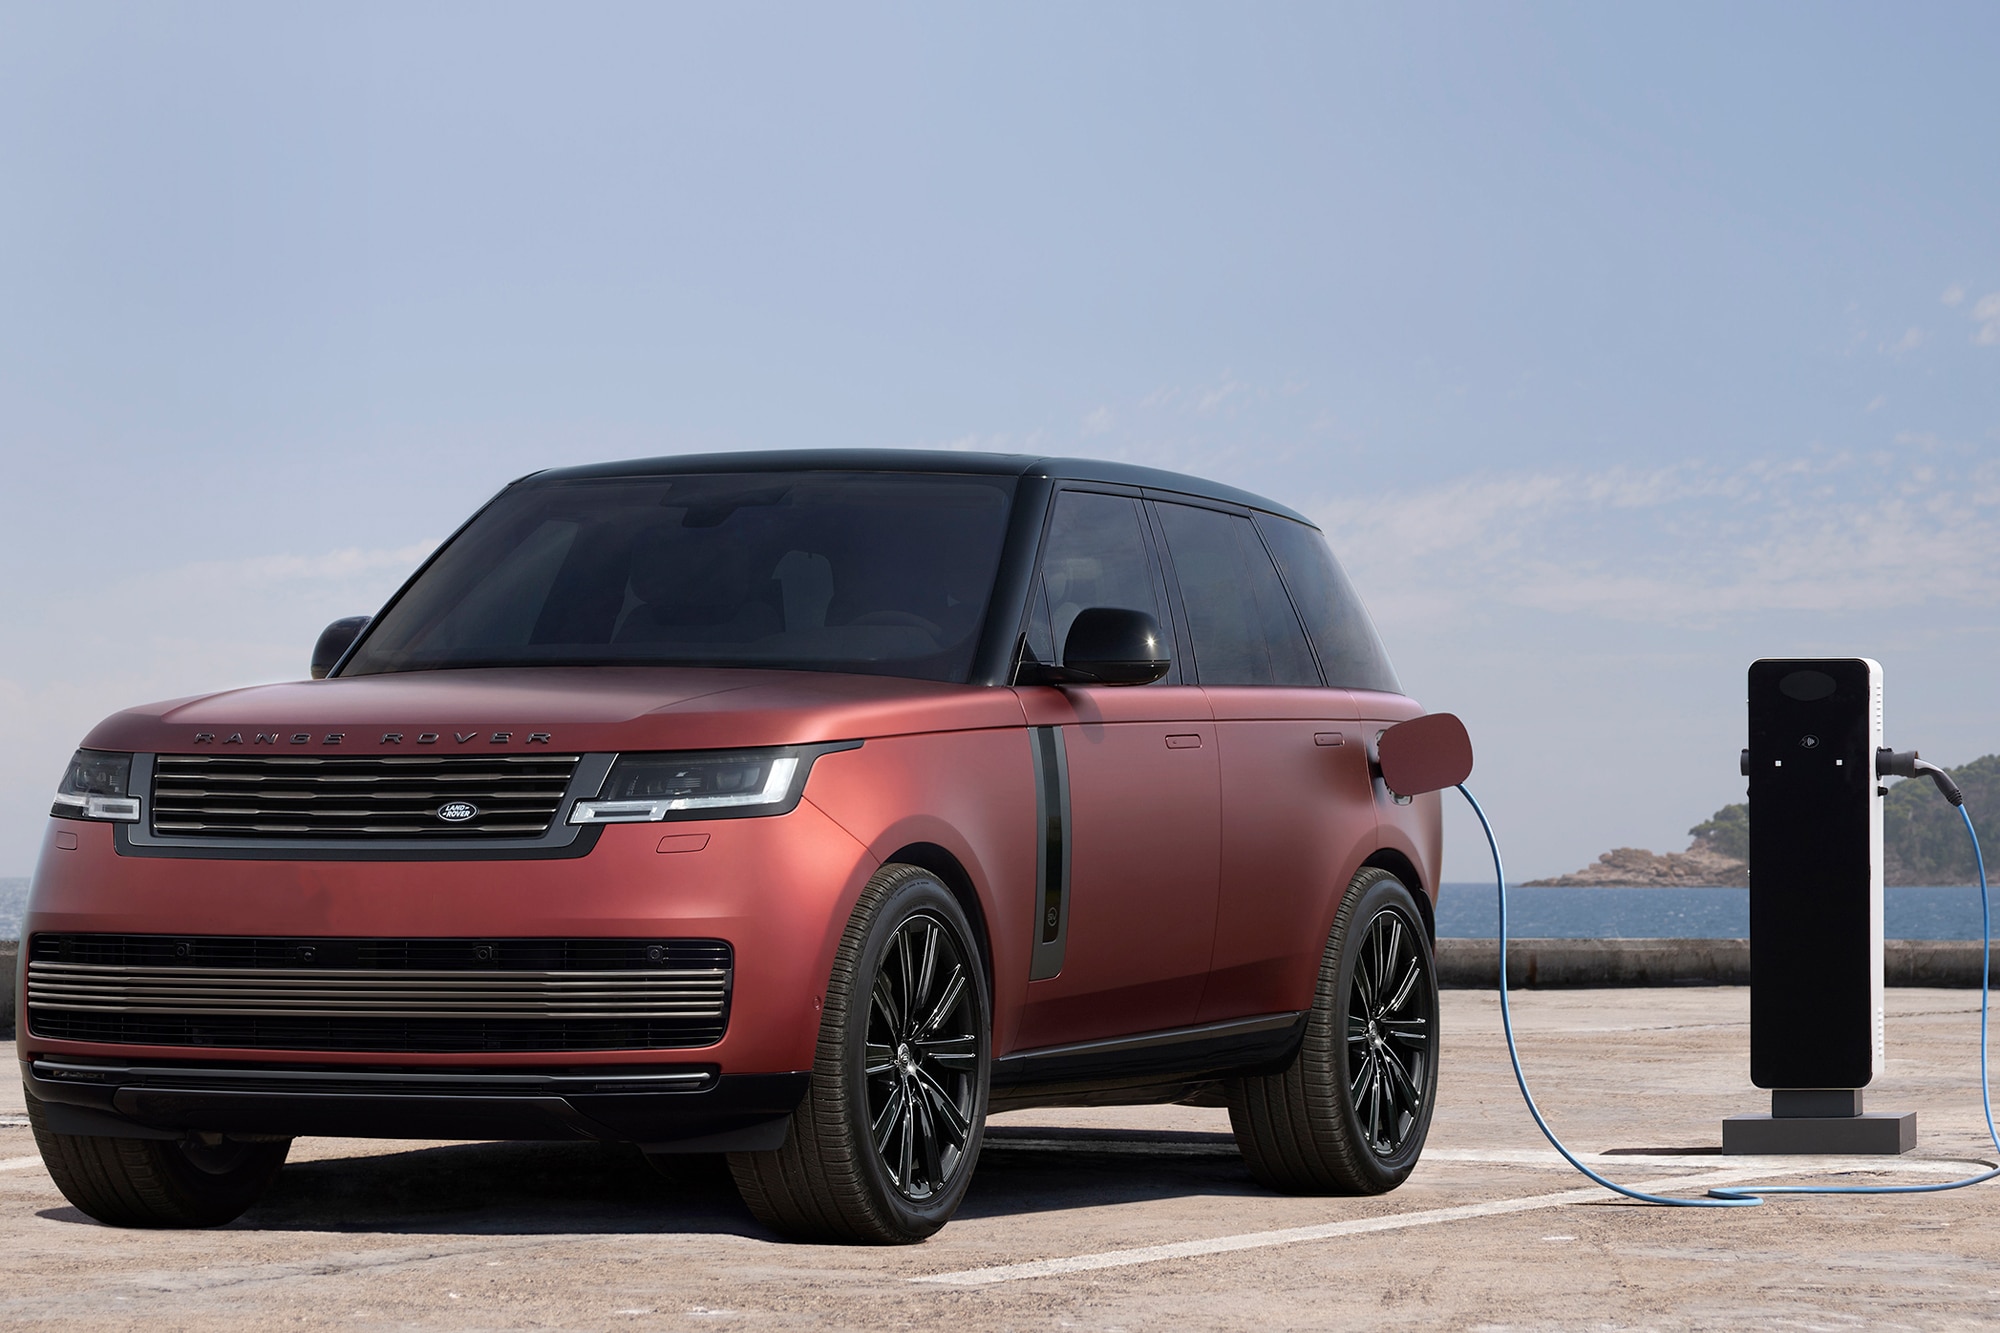 2022 Land Rover Range Rover SV Intrepid PHEV at charging station by the ocean